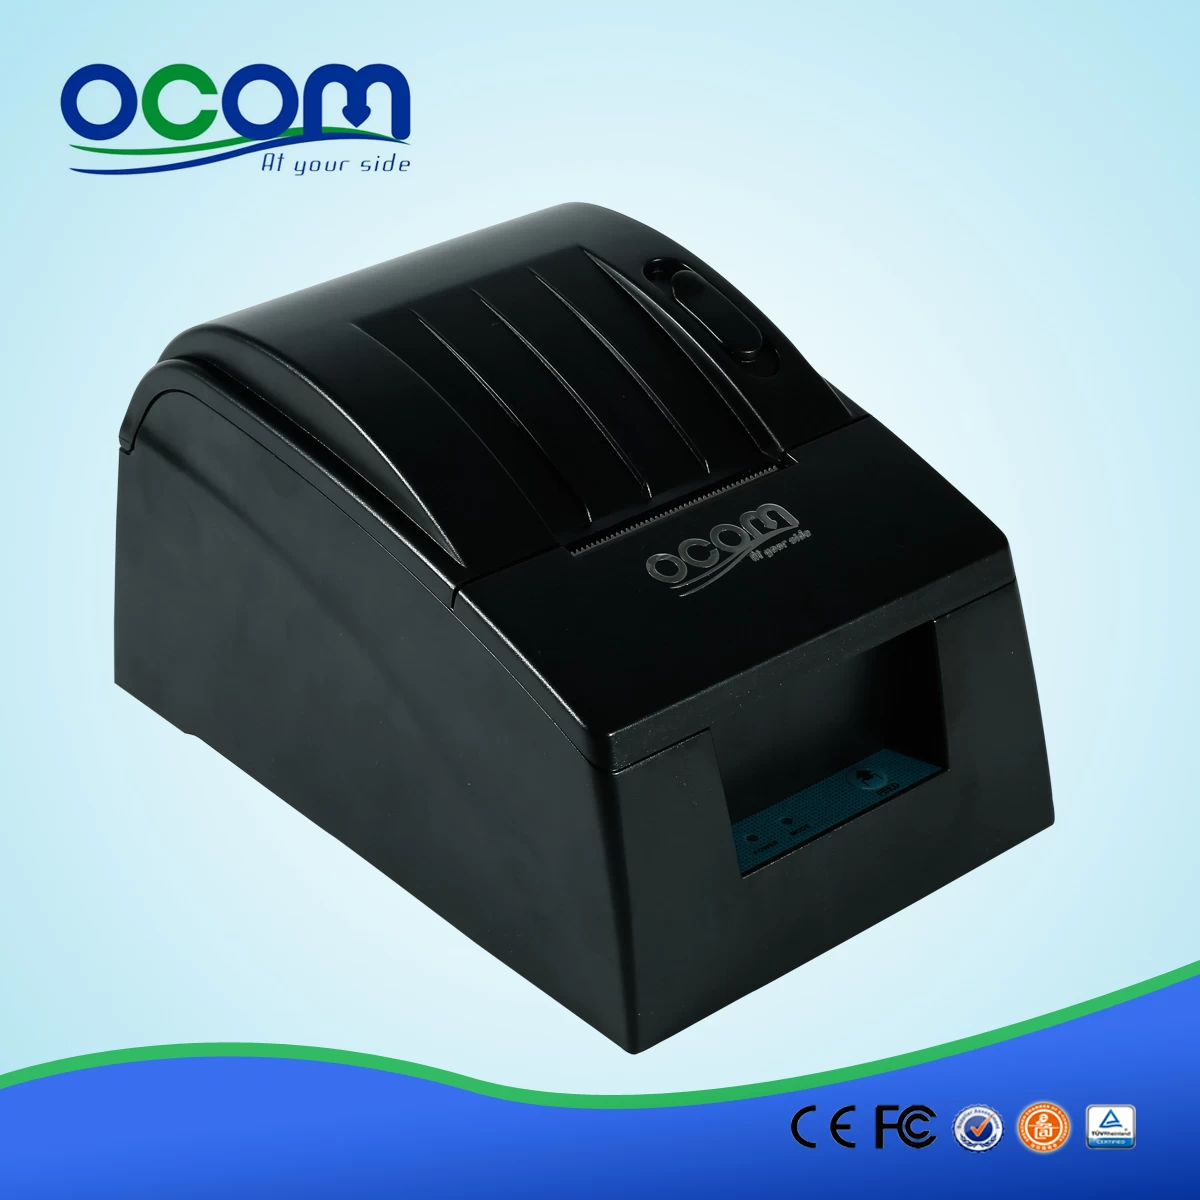 58mm android thermal receipt printer-- OCPP-586